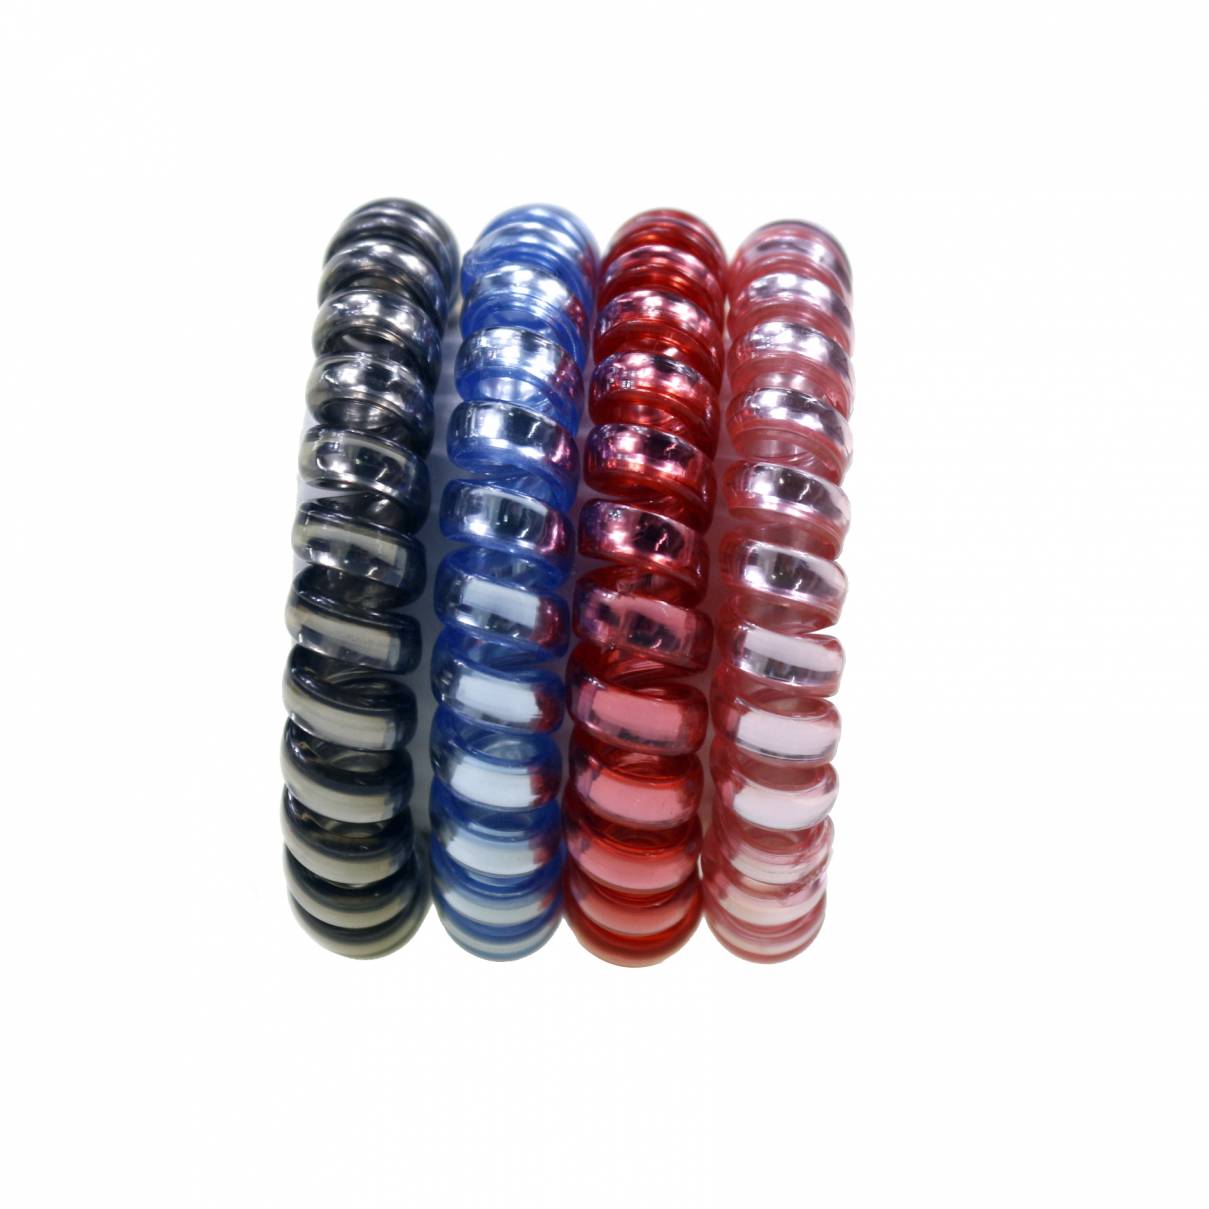 Hot Sale Telephone Wire Line Elastic Tiesspiral Hair Ties Coil Clear